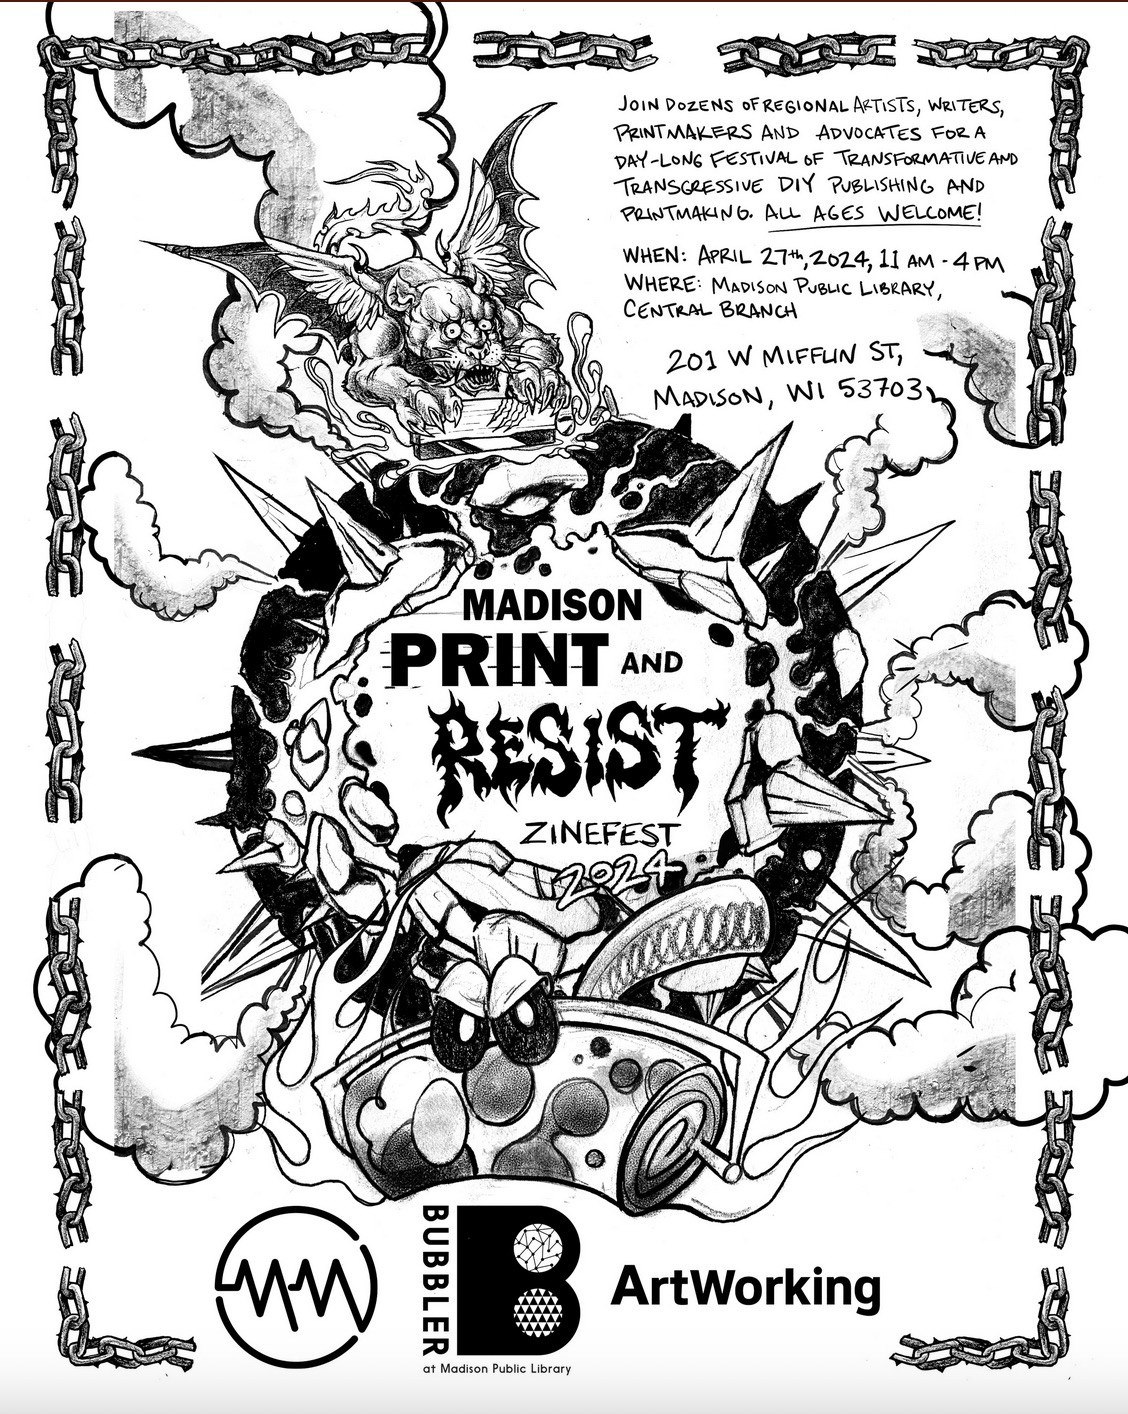 poster for Madison Print & Resist Zinefest at Madison Public Library